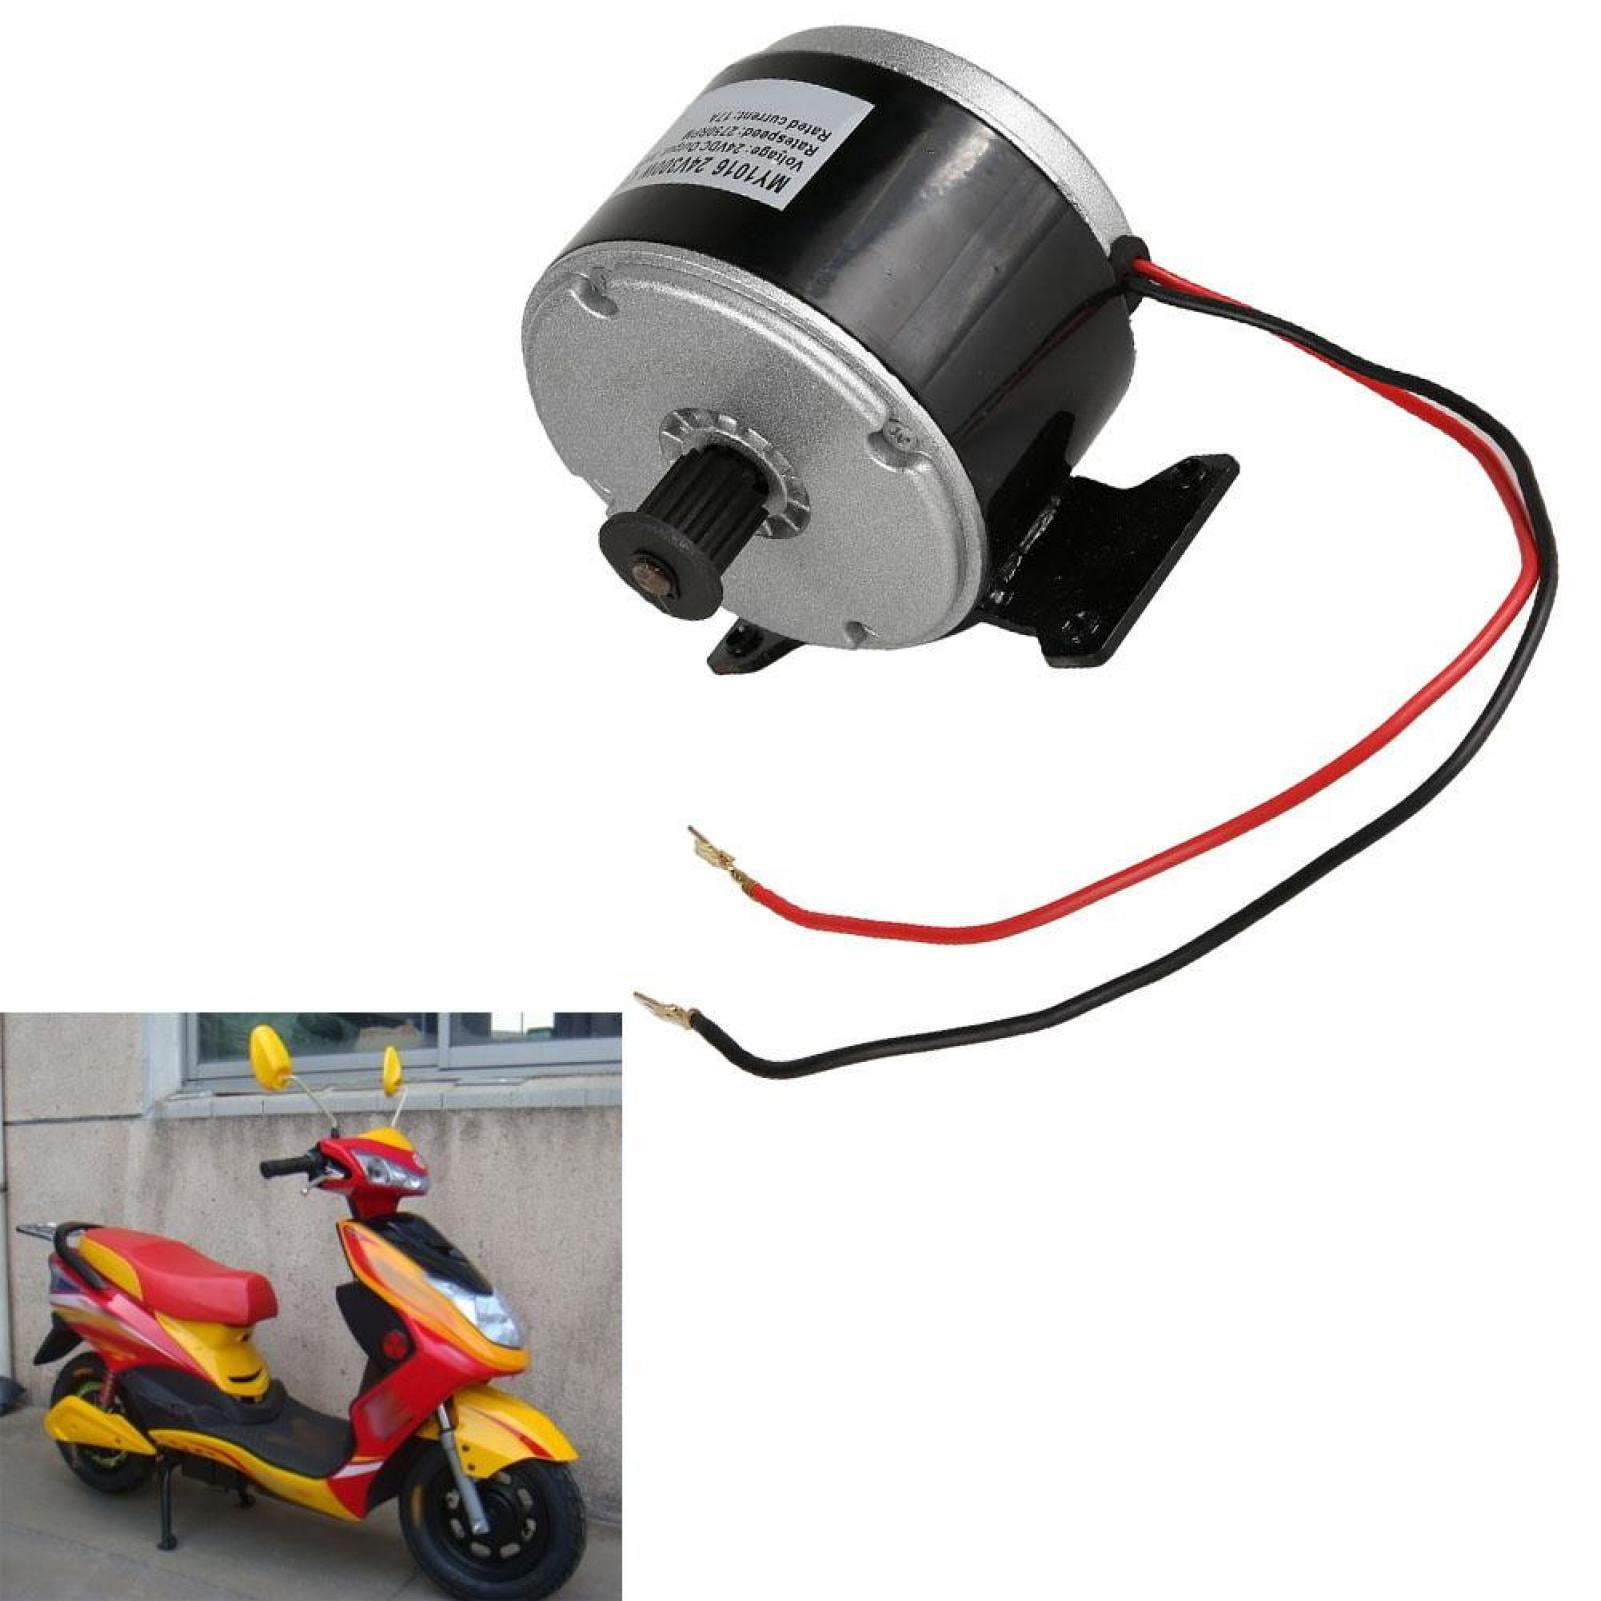 24V 300W E-Scooter Brushed Motor Speed Controller for Electric Scooter Vehicle 